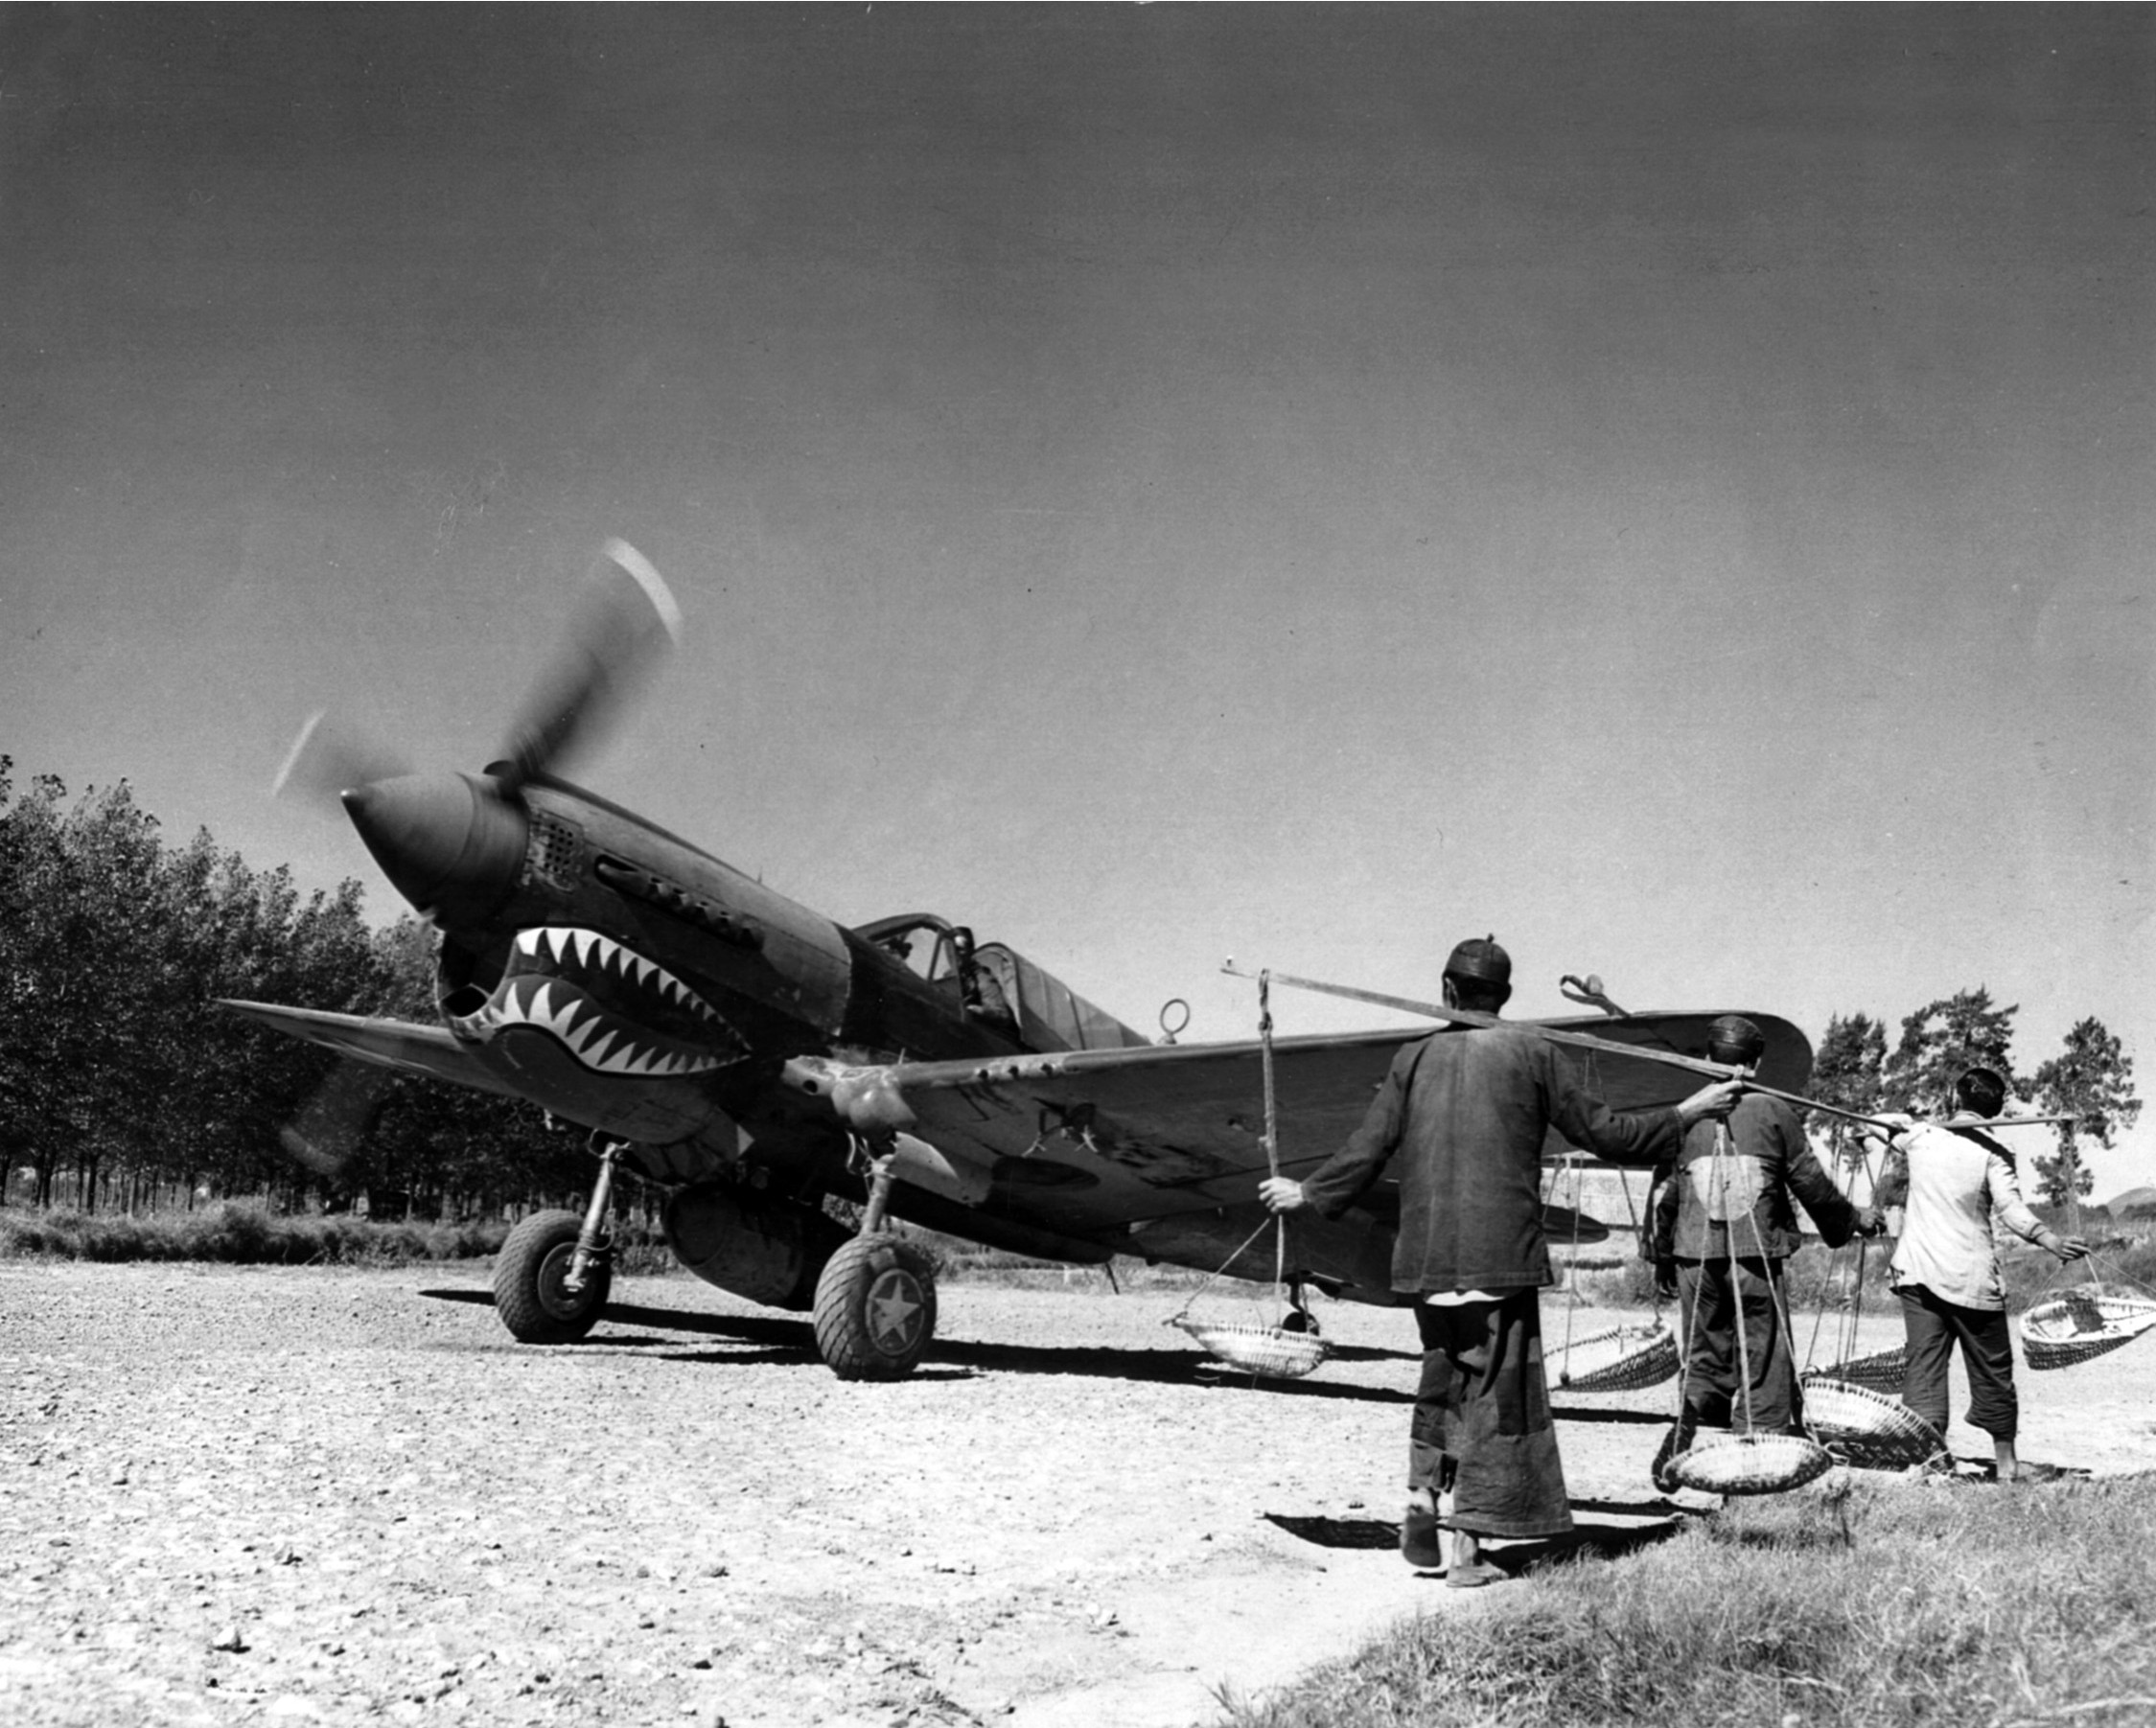 A P-40 of the lengendary Flying Tigers prepares for takeoff from an airfield in a remote part of China. 